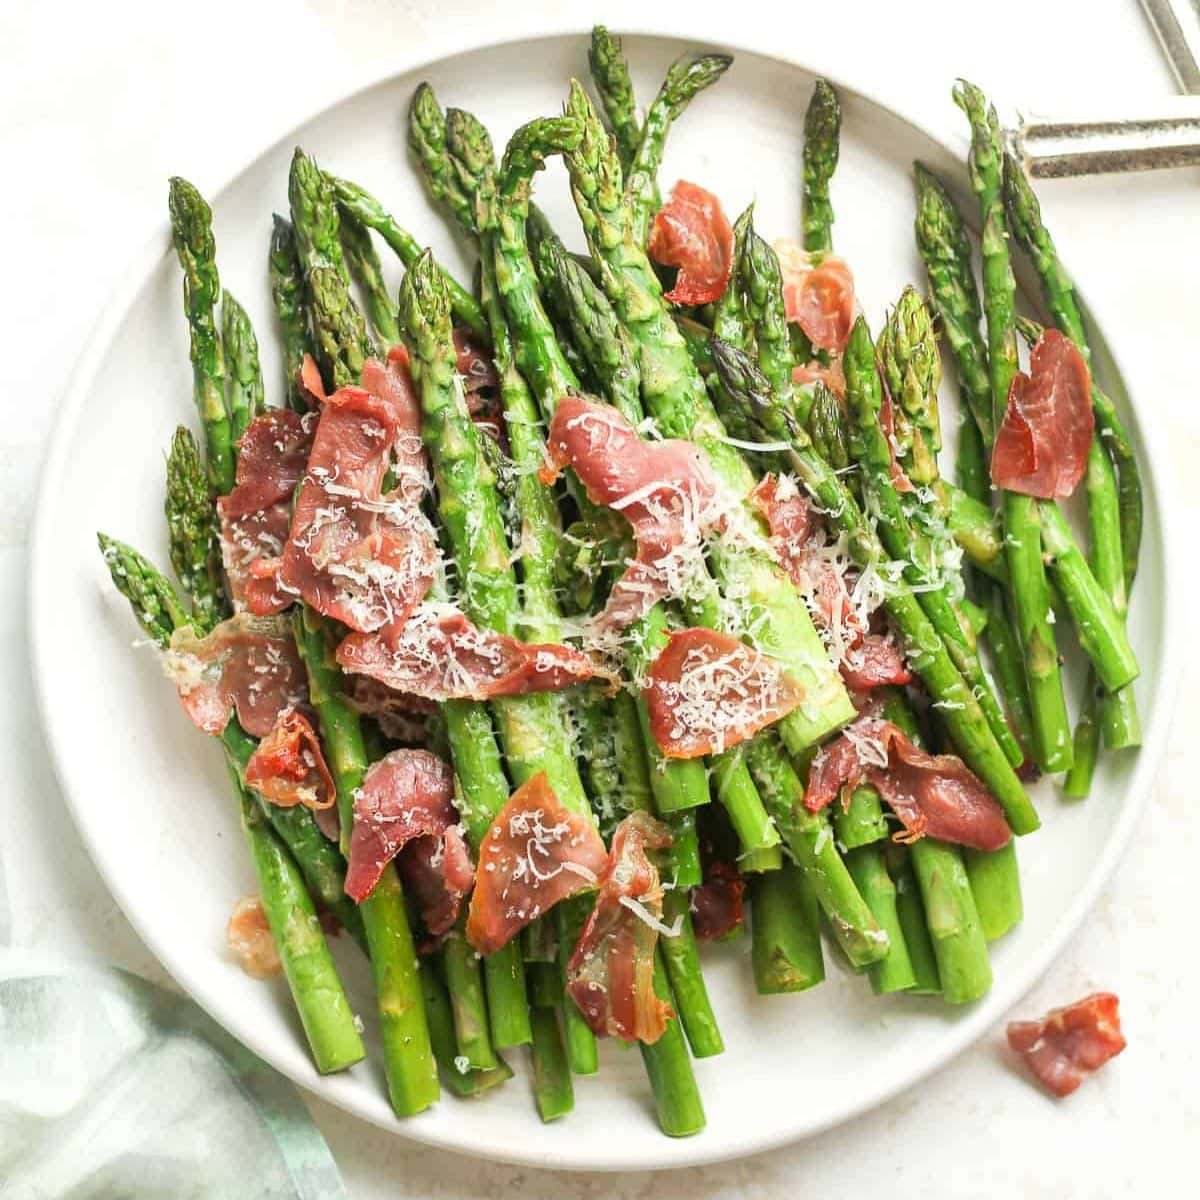 Roasted asparagus with crispy prosciutto and shredded parmesan on a serving plate.